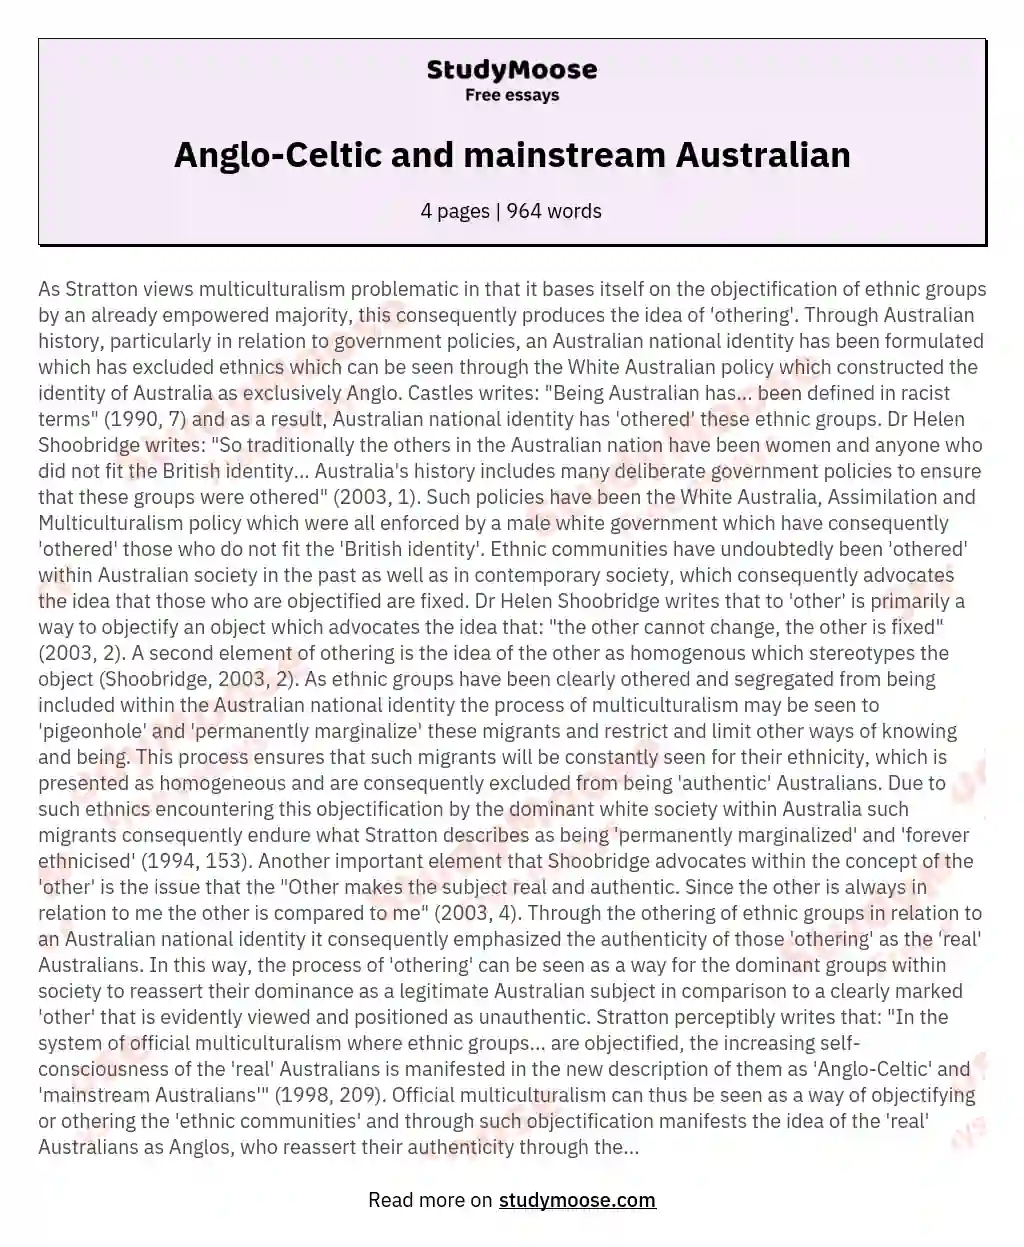 Anglo-Celtic and mainstream Australian essay